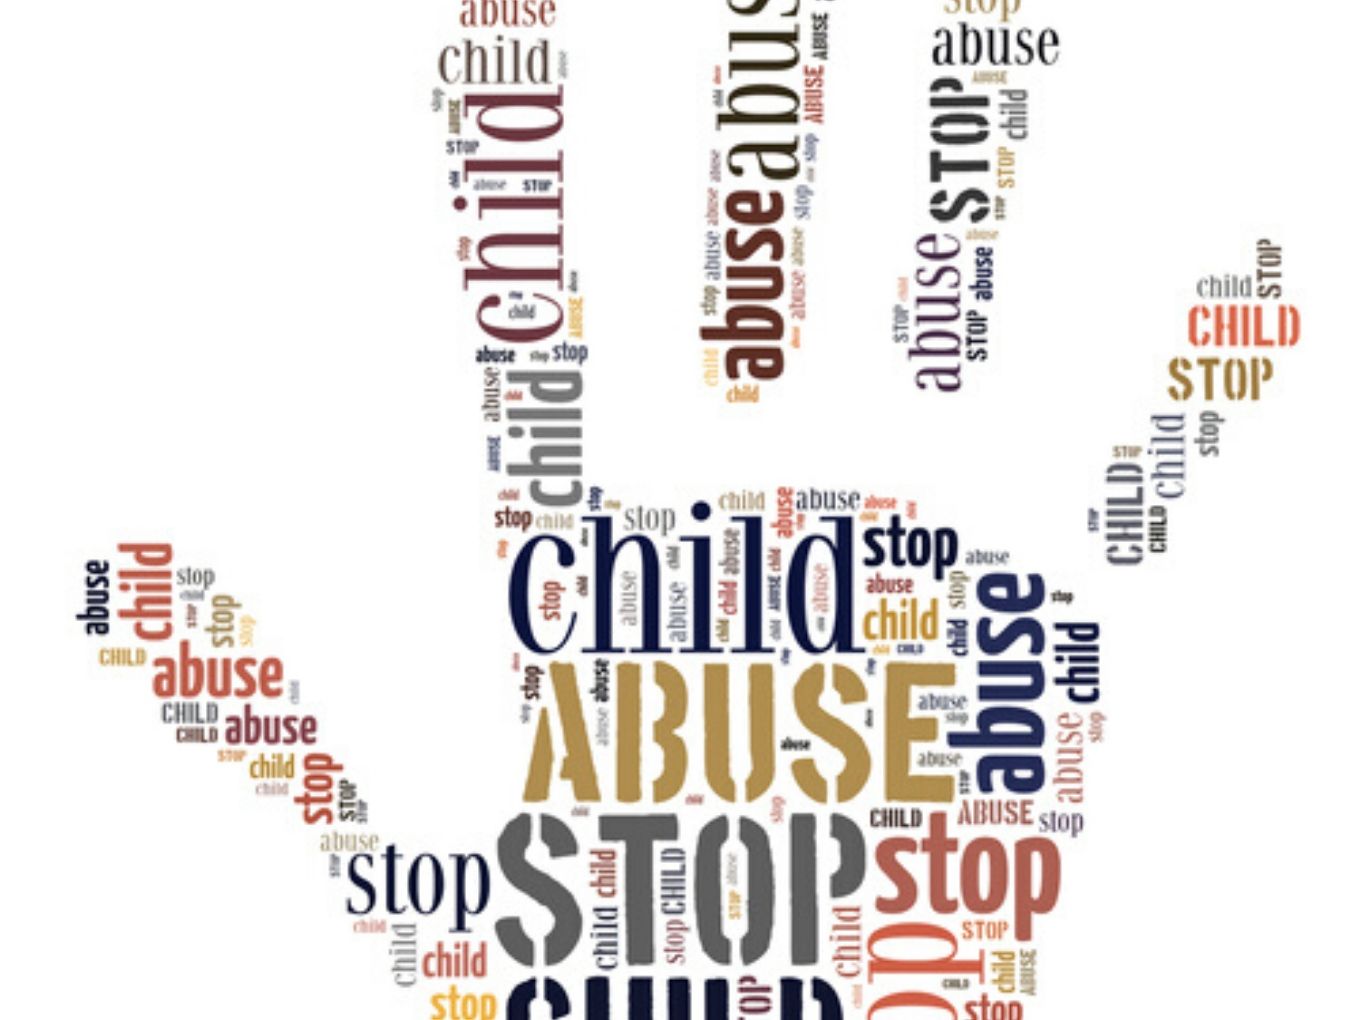 Govt Takes Suggestions From Google & Co To Curb Online Child Abuse